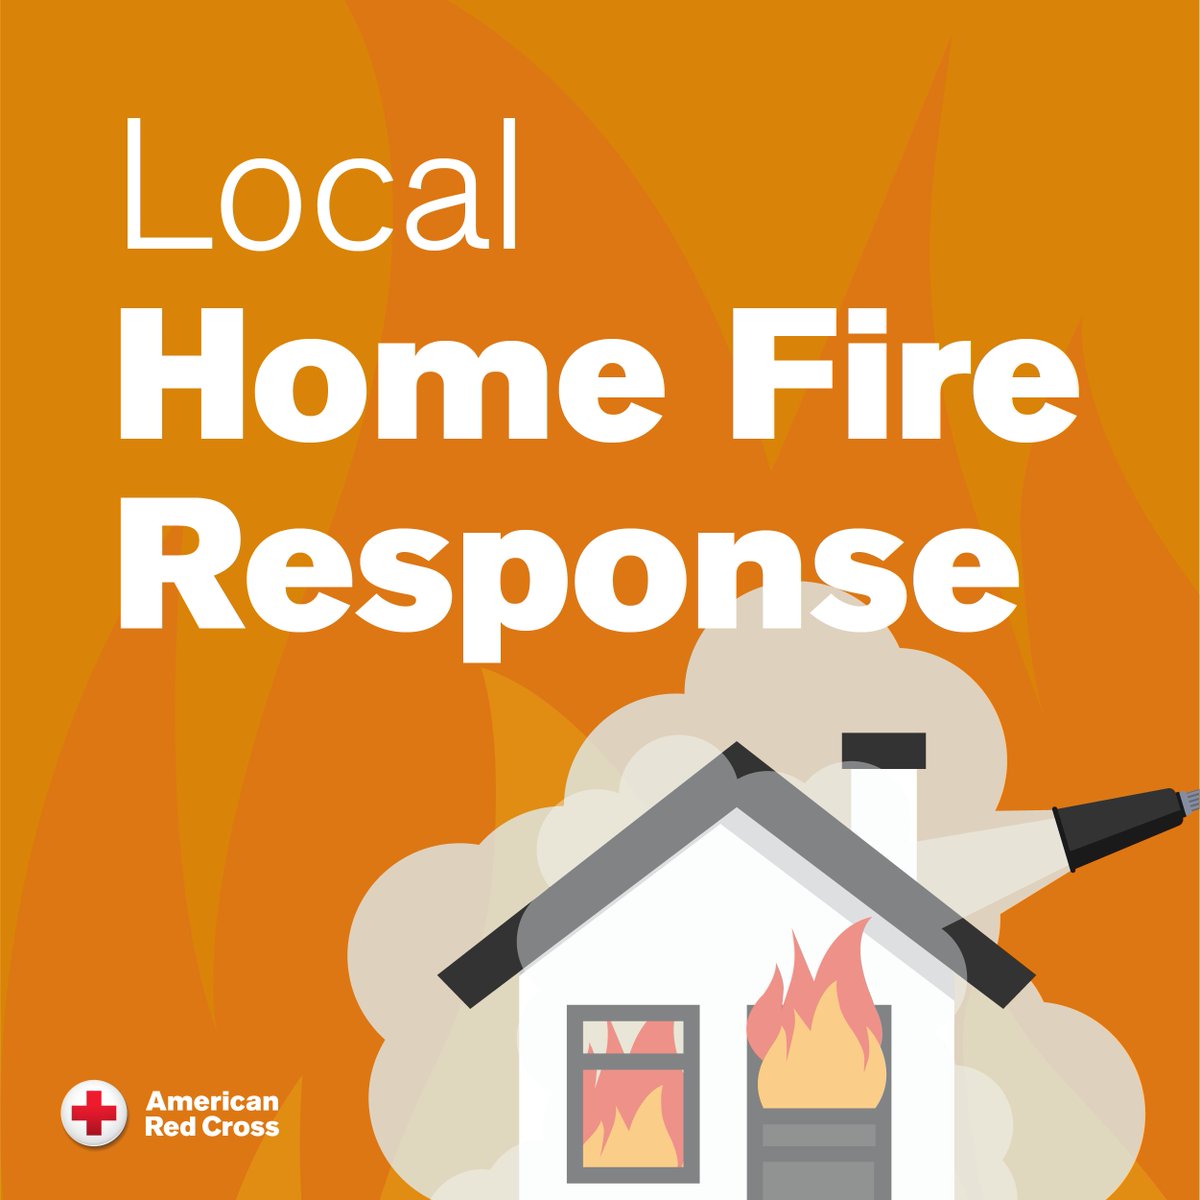 On Wednesday, our Disaster Action Team responders assisted 4 families - 15 people total - in response to home fires in #Philadelphia (3300 block of Frankford Ave. and 5000 block of Rosehill St.) and #Montco (Boncouer Rd. in #Cheltenham). #EndHomeFires